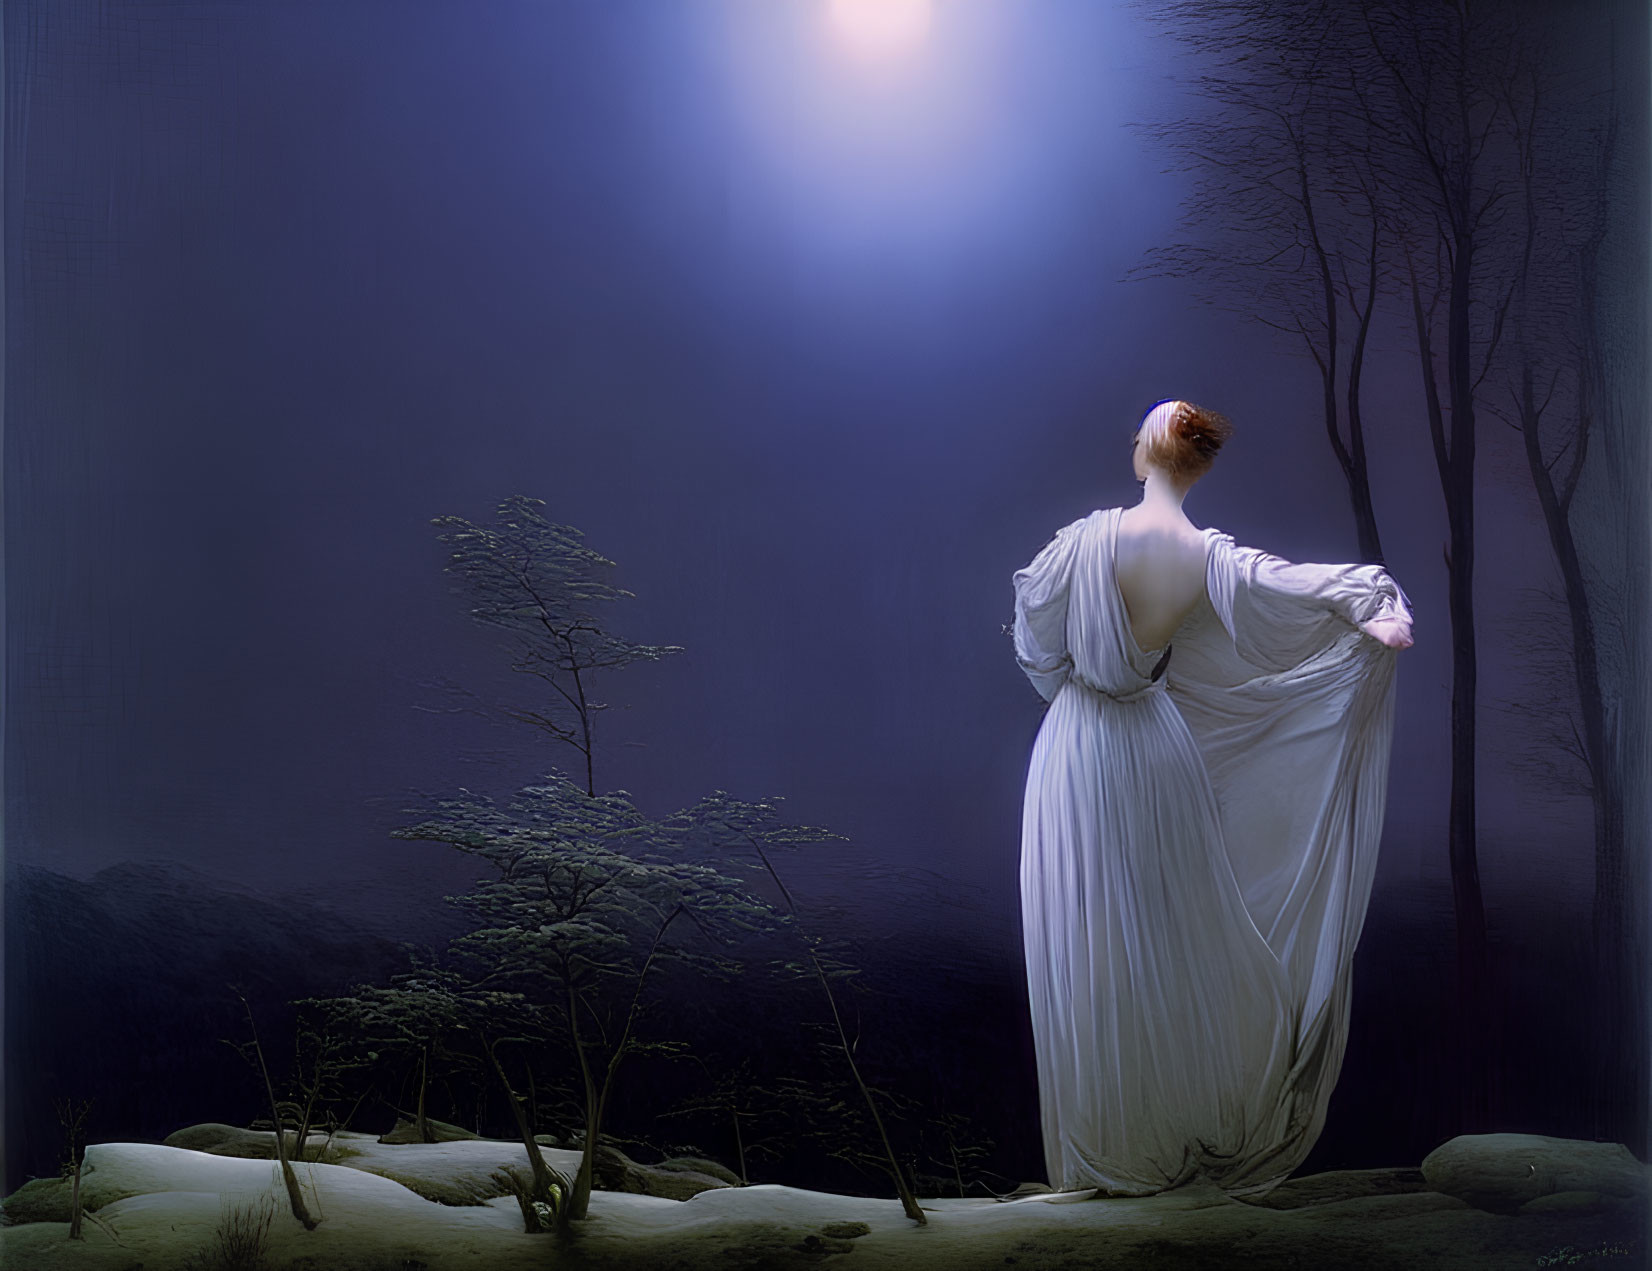 Woman in white dress standing in snowy moonlit landscape with bare trees